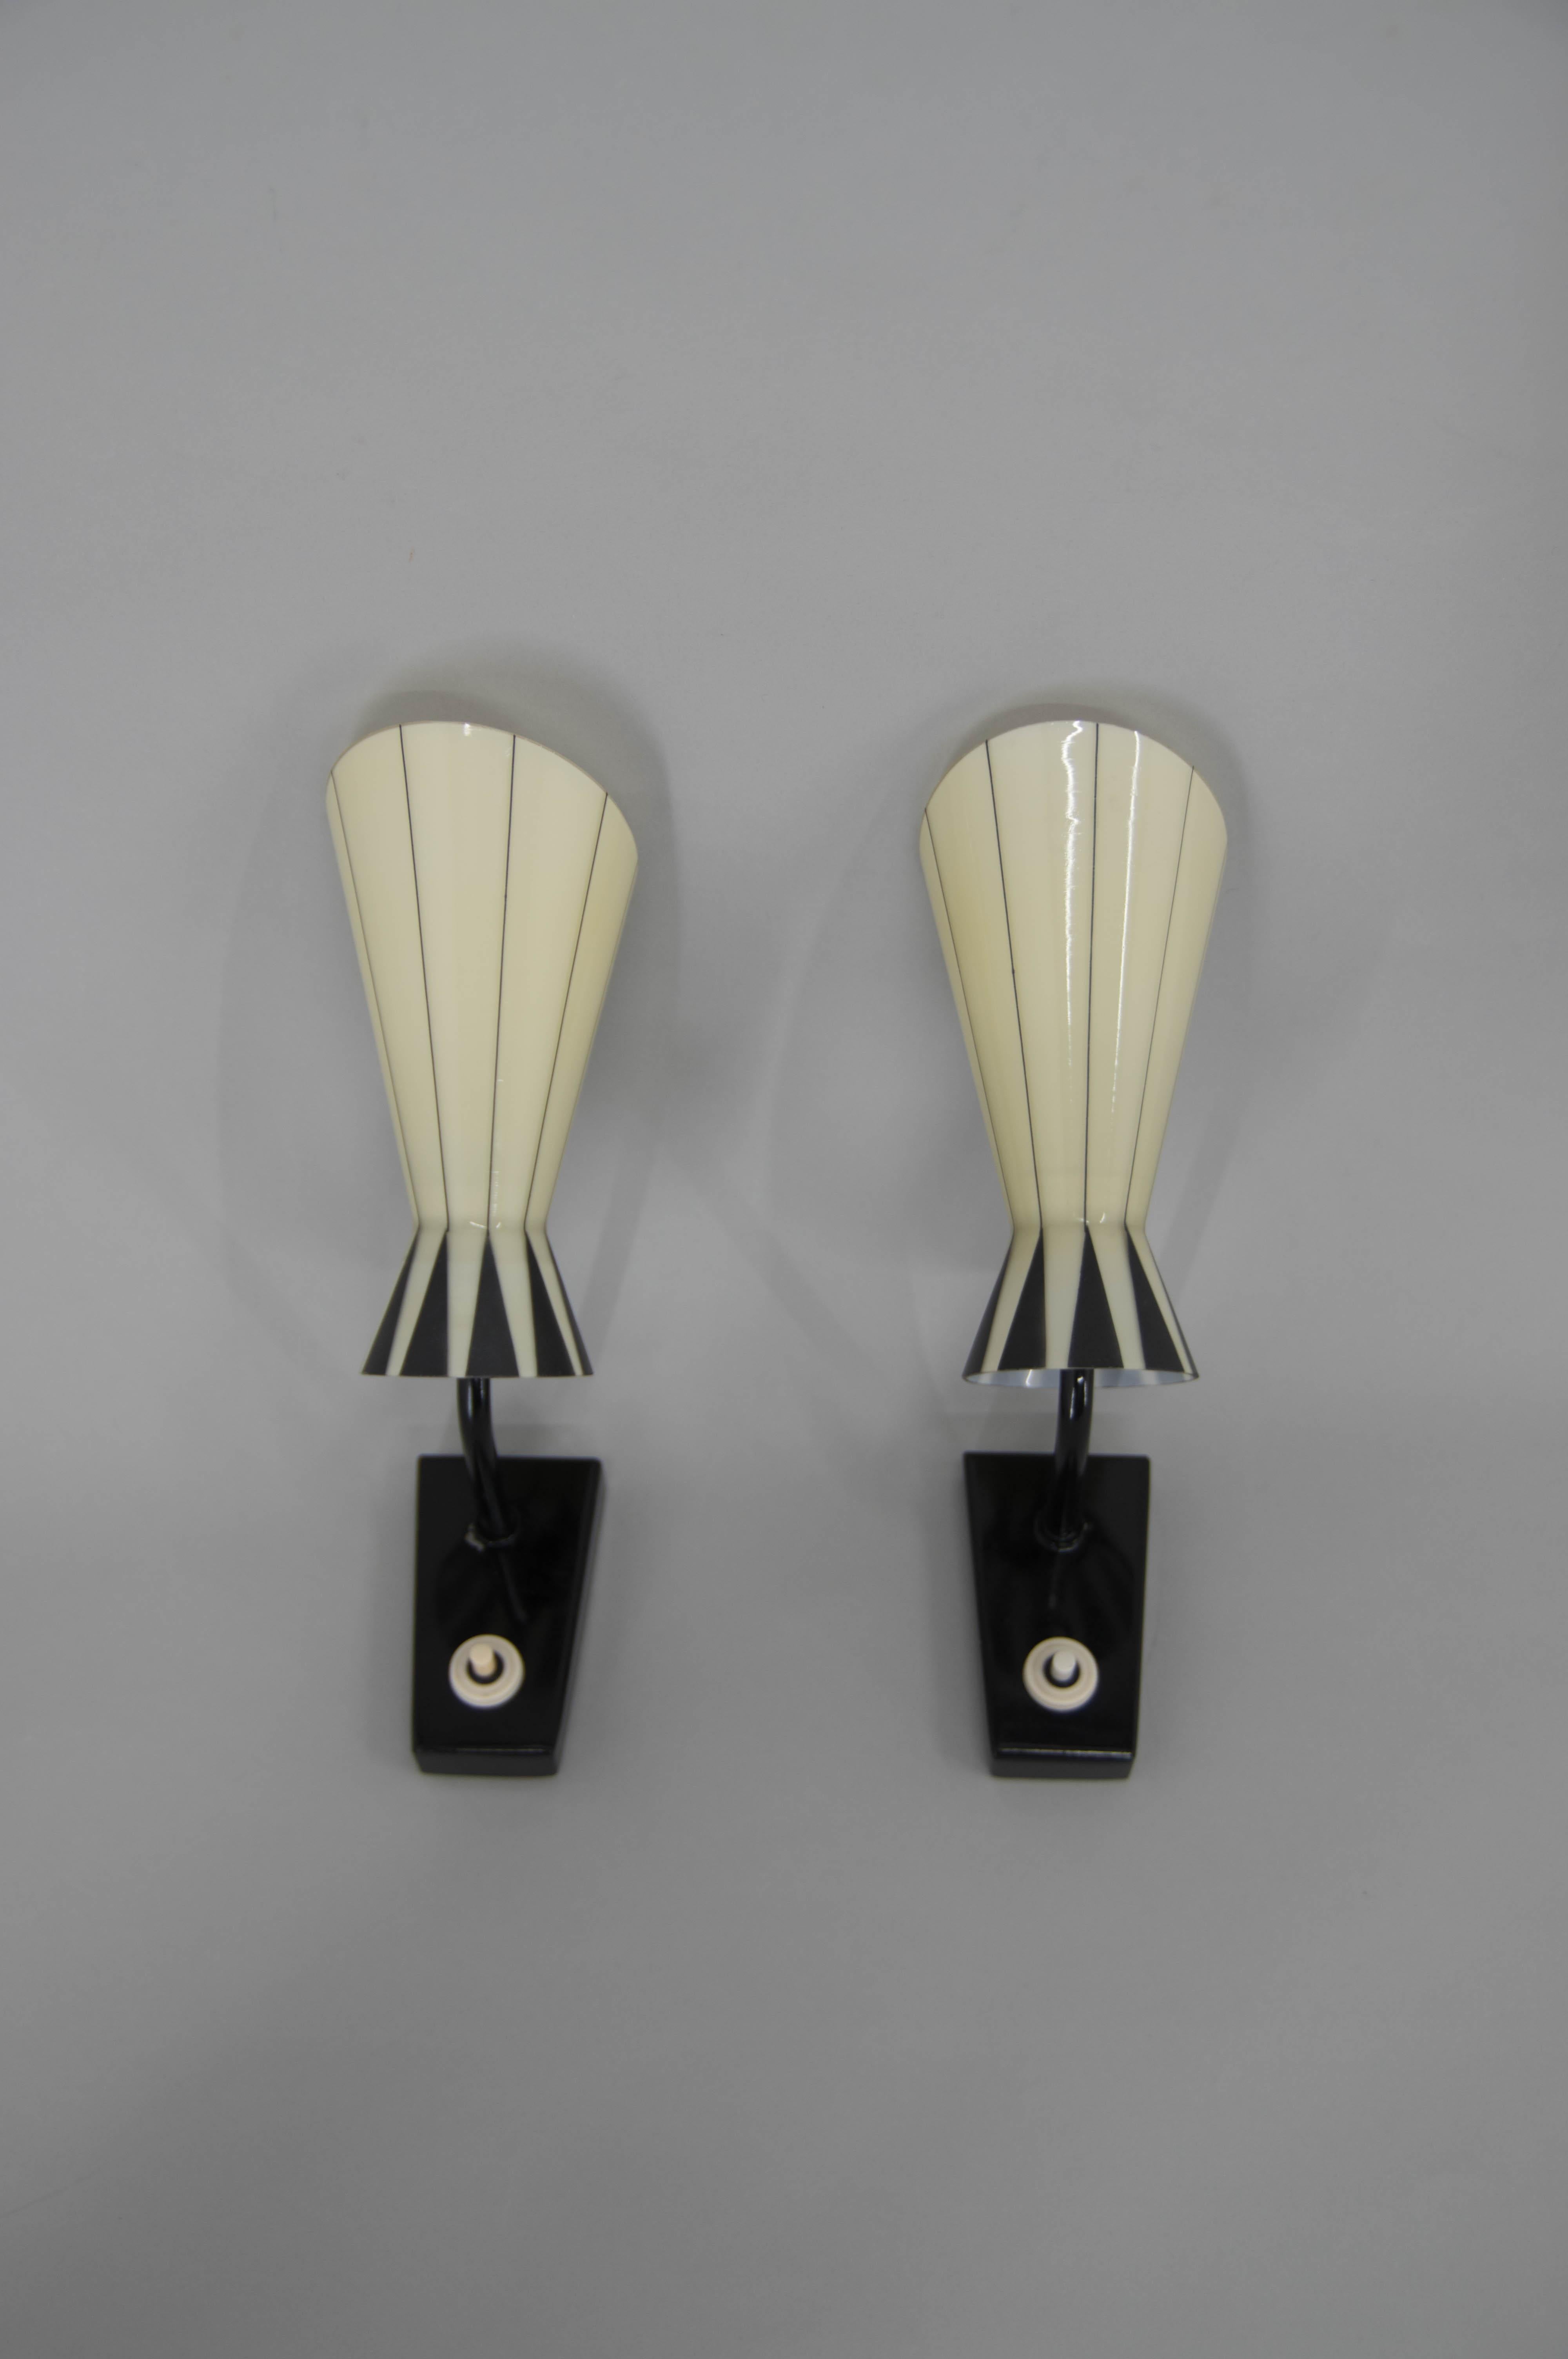 Art Deco Wall Lamps, Europe, 1960s For Sale 1